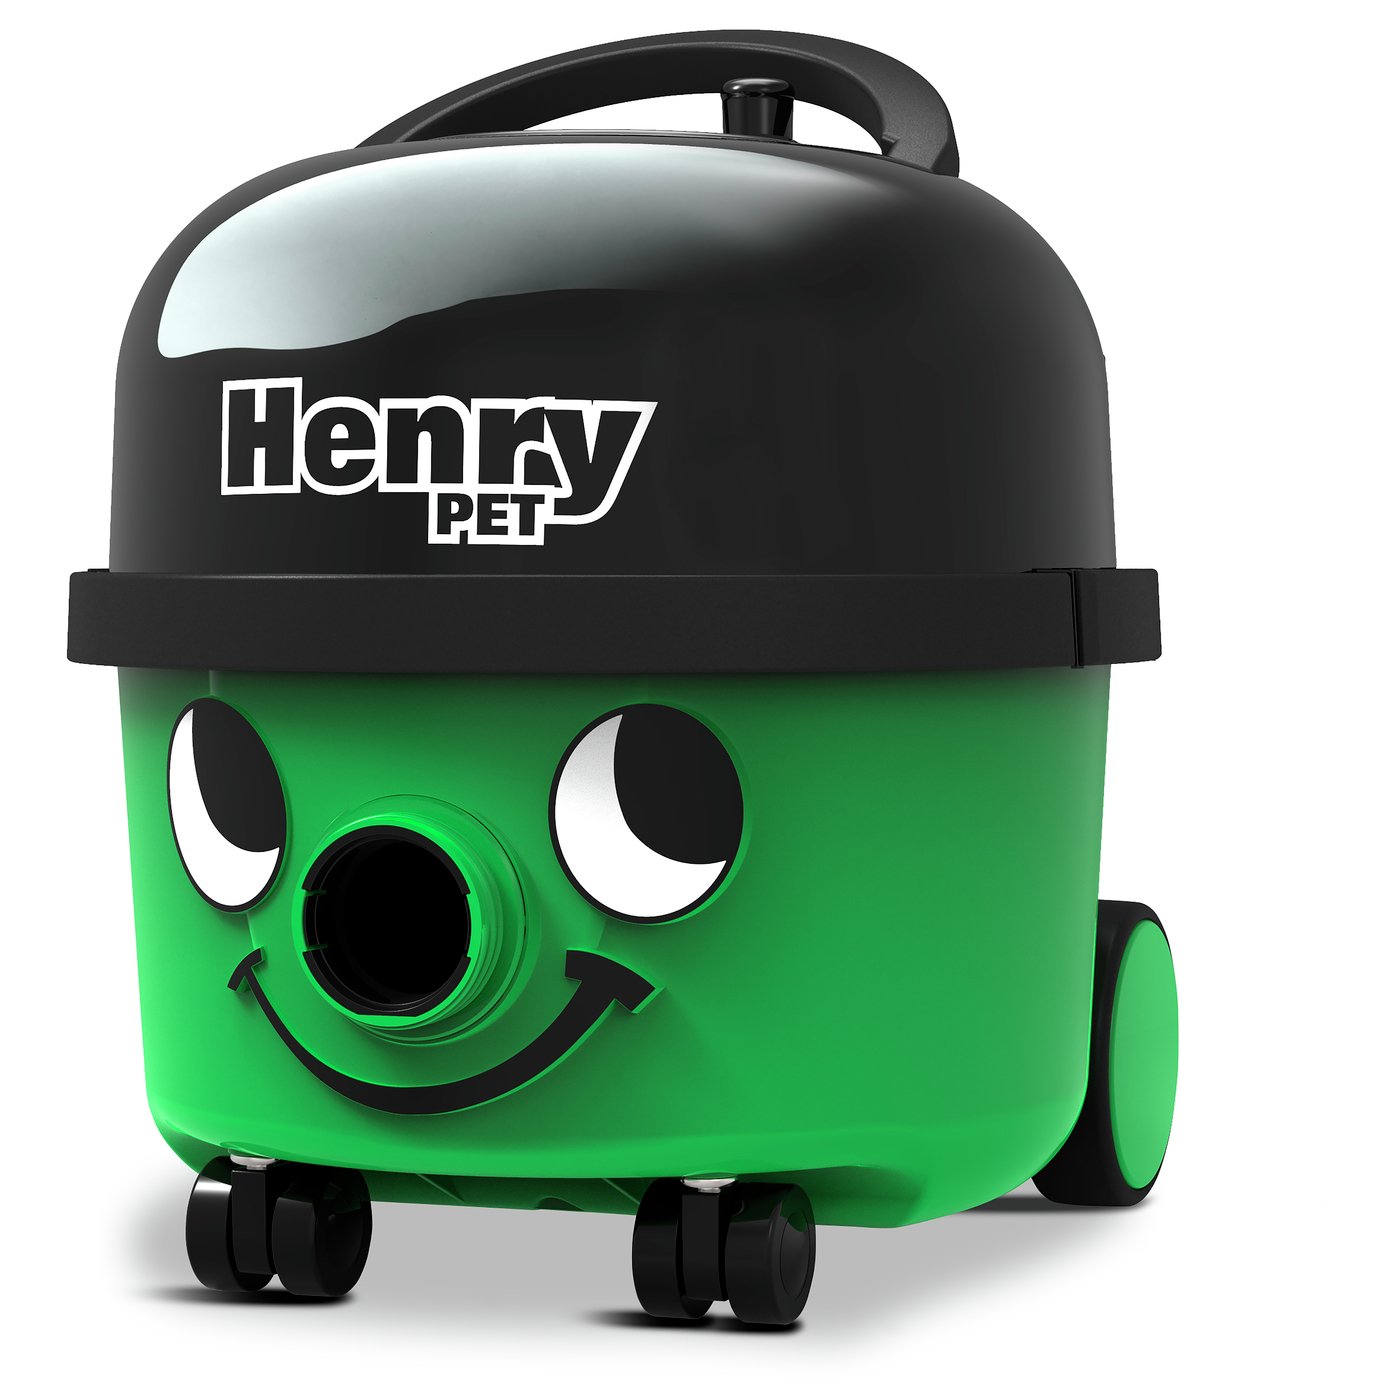 Henry Pet PET200-11 Bagged Cylinder Vacuum Cleaner Review